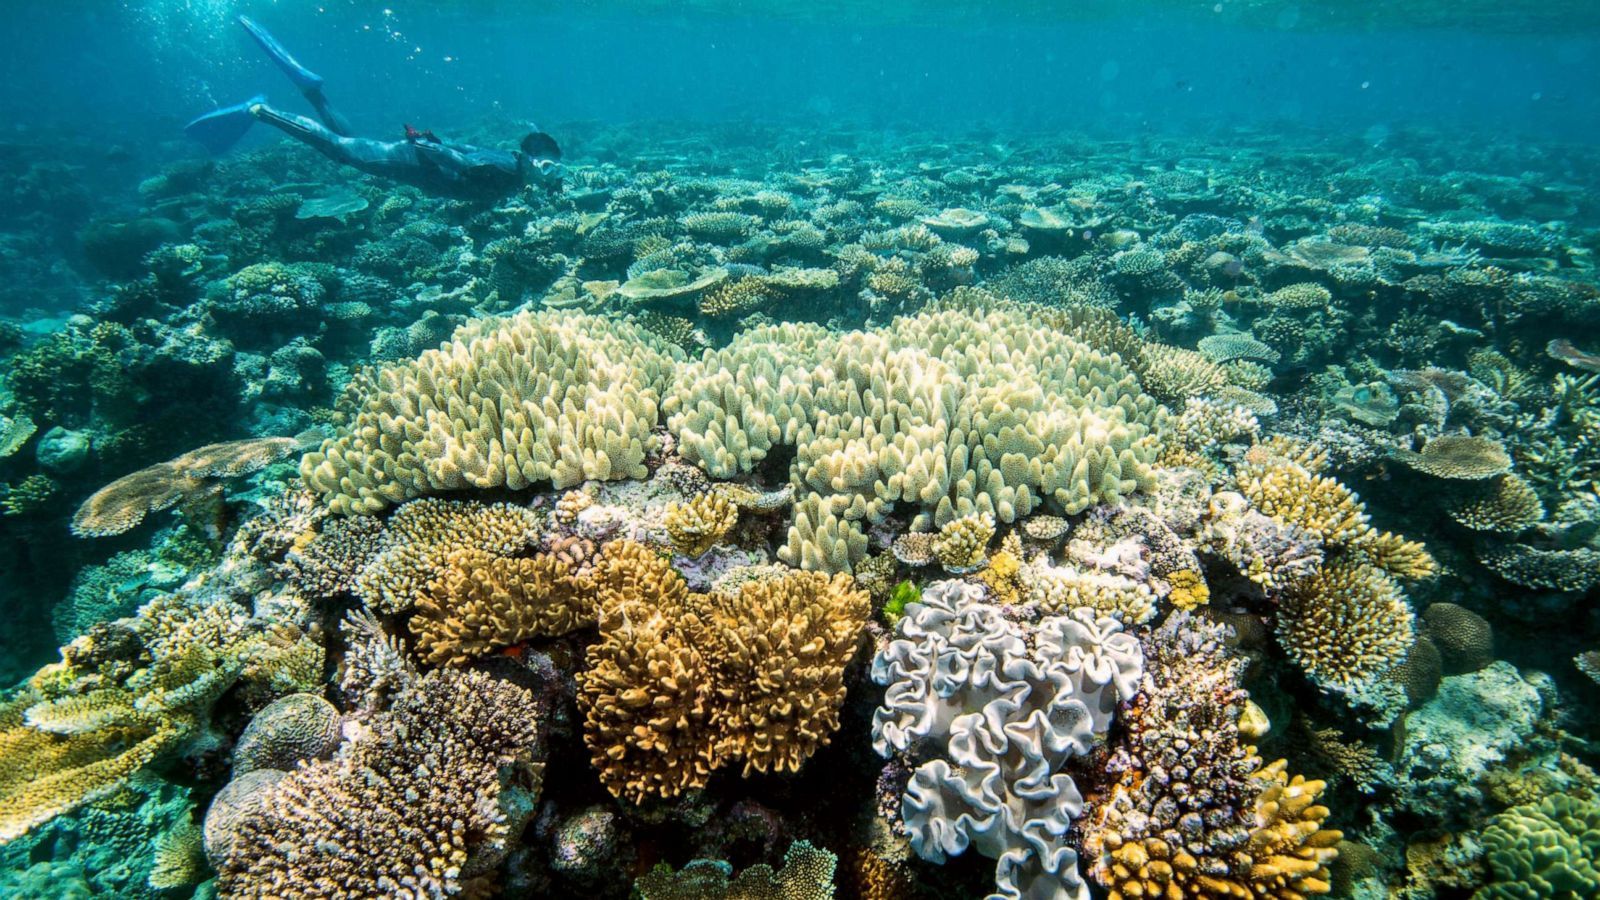 Great Barrier Reef has deteriorated to 'critical' level due to climate change